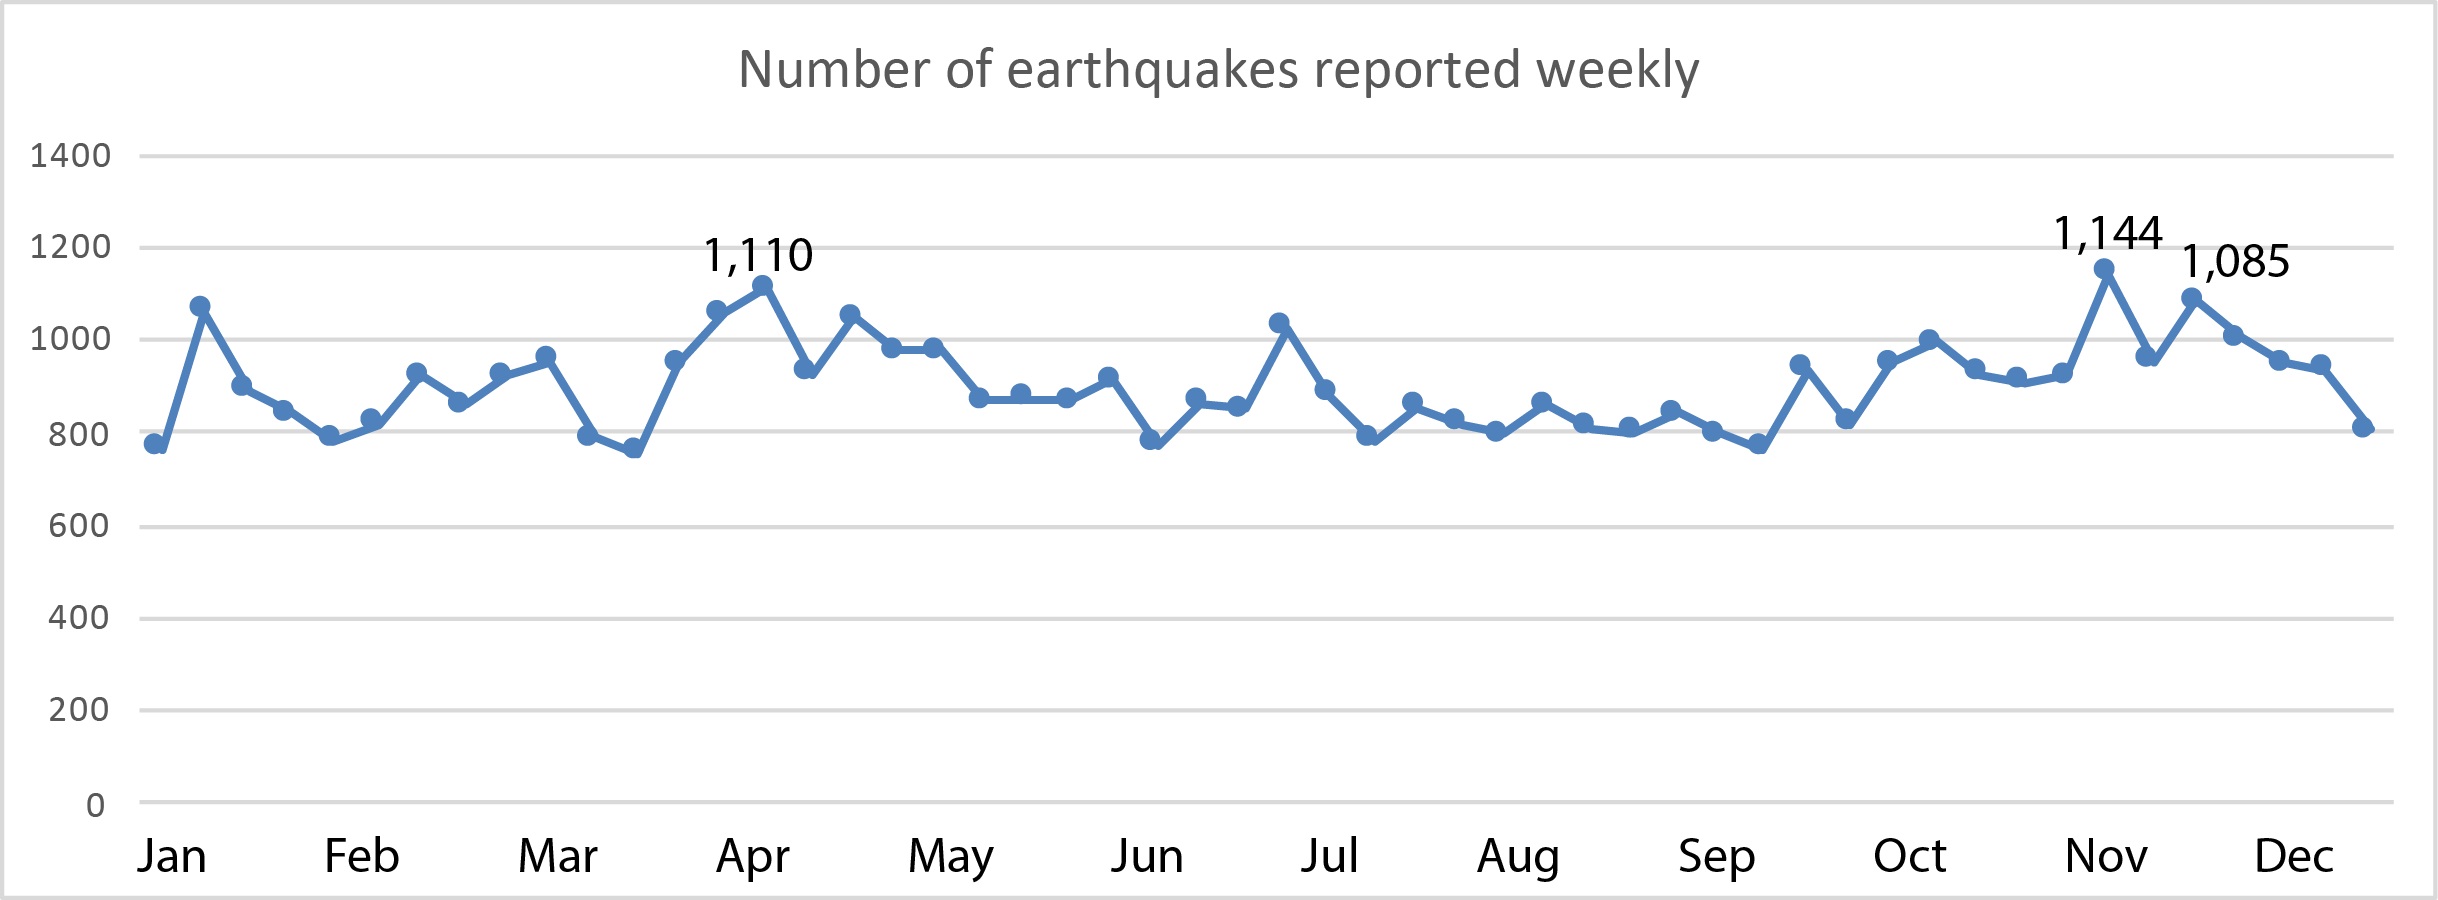 Line graph showing weekly number of earthquakes, ranging from just below 800 up to 1,144. 